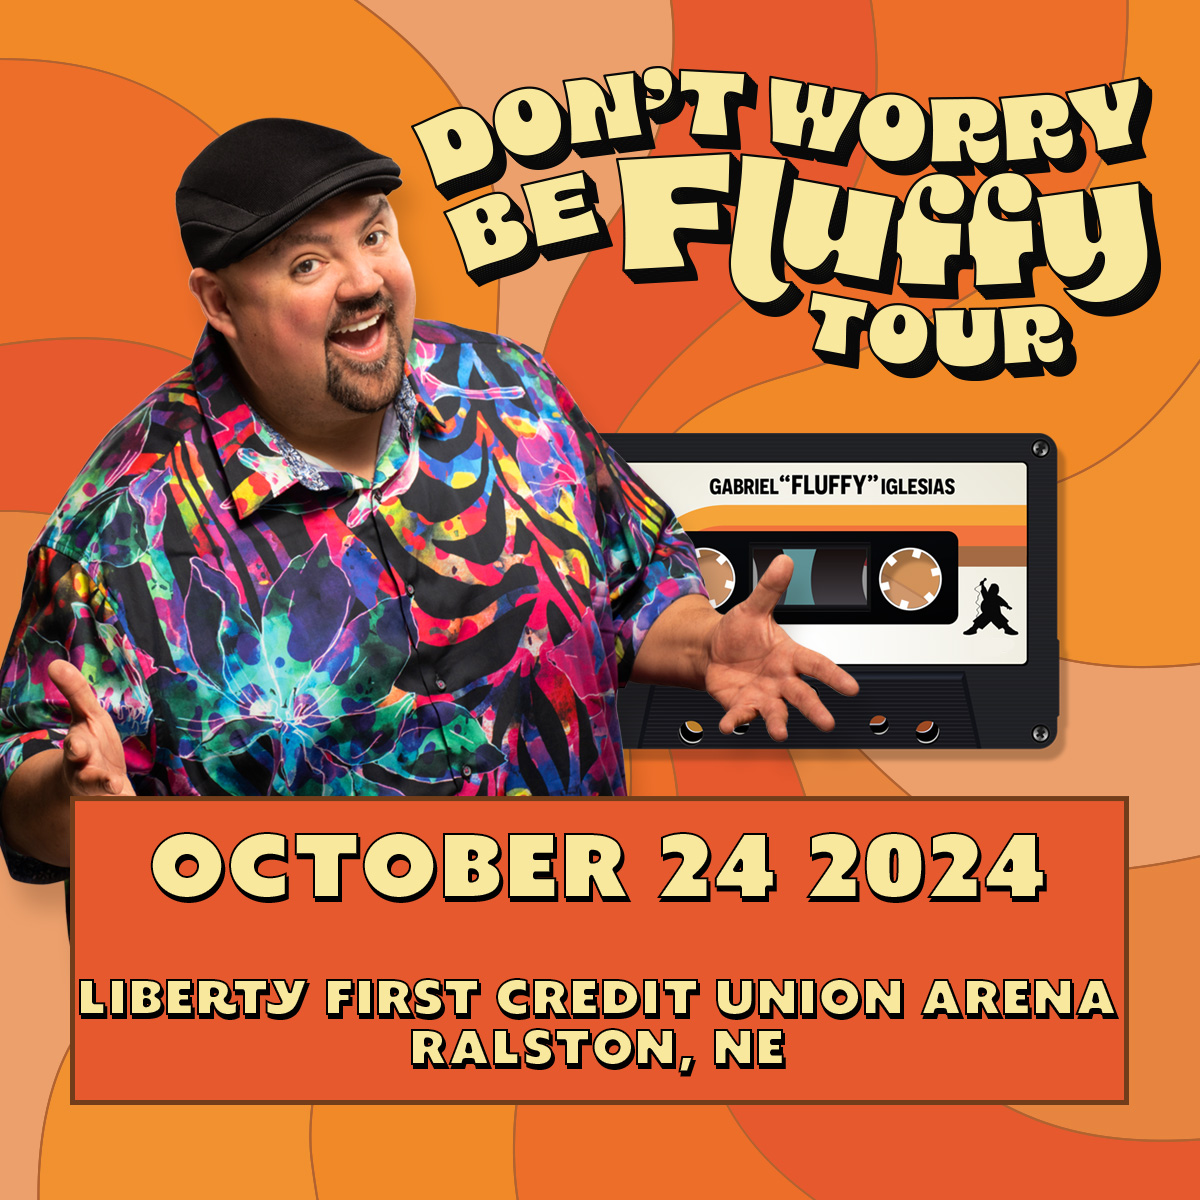 𝒟𝑜𝓃'𝓉 𝓌𝑜𝓇𝓇𝓎 😳 𝓫𝓮 𝓕𝓵𝓾𝓯𝓯𝔂 😎 Gabriel Iglesias will be here on Oct. 24!